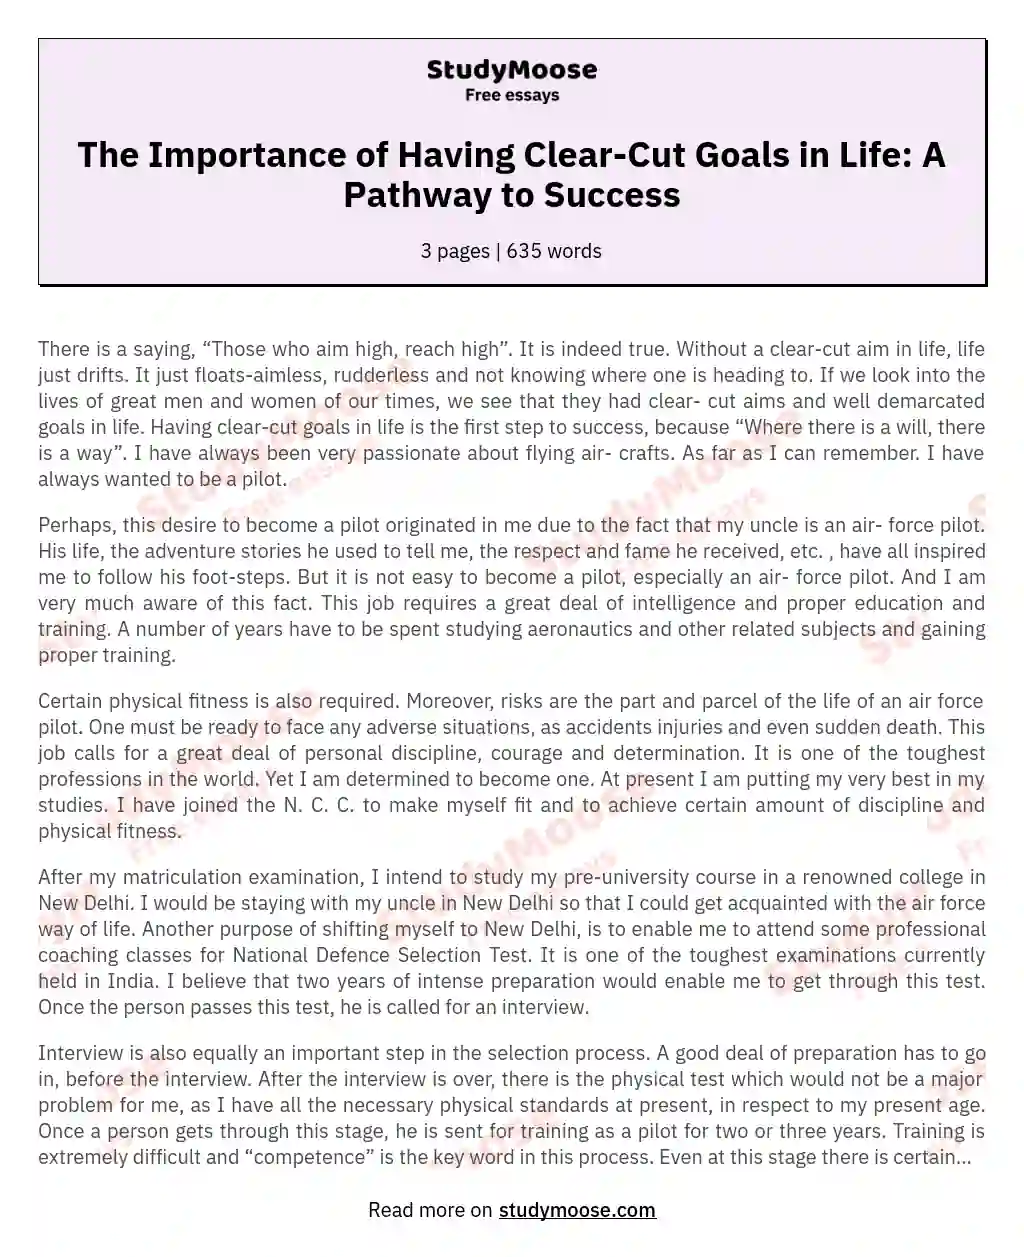 The Importance of Having Clear-Cut Goals in Life: A Pathway to Success essay